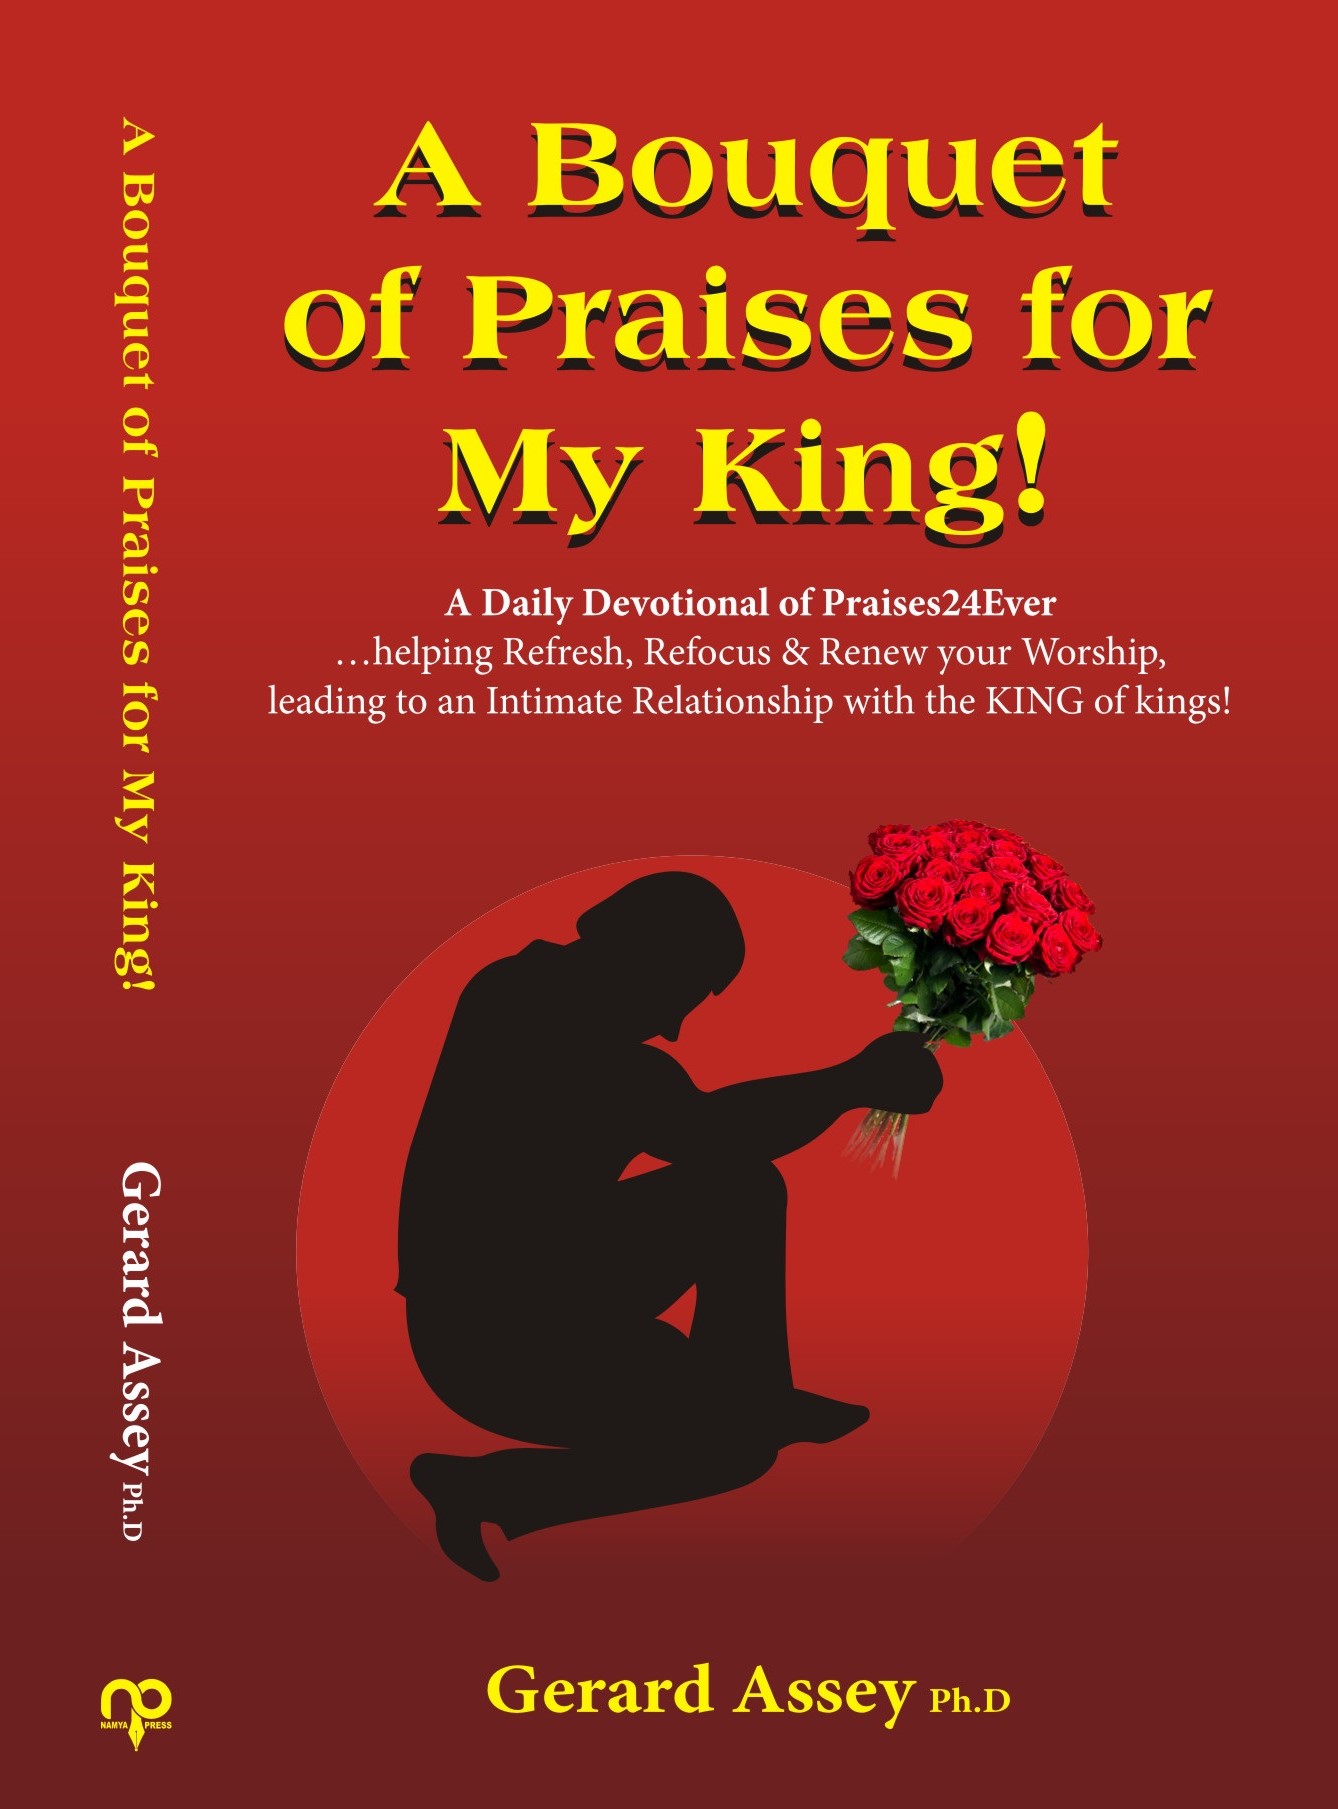 A Bouquet of Praises for My King!